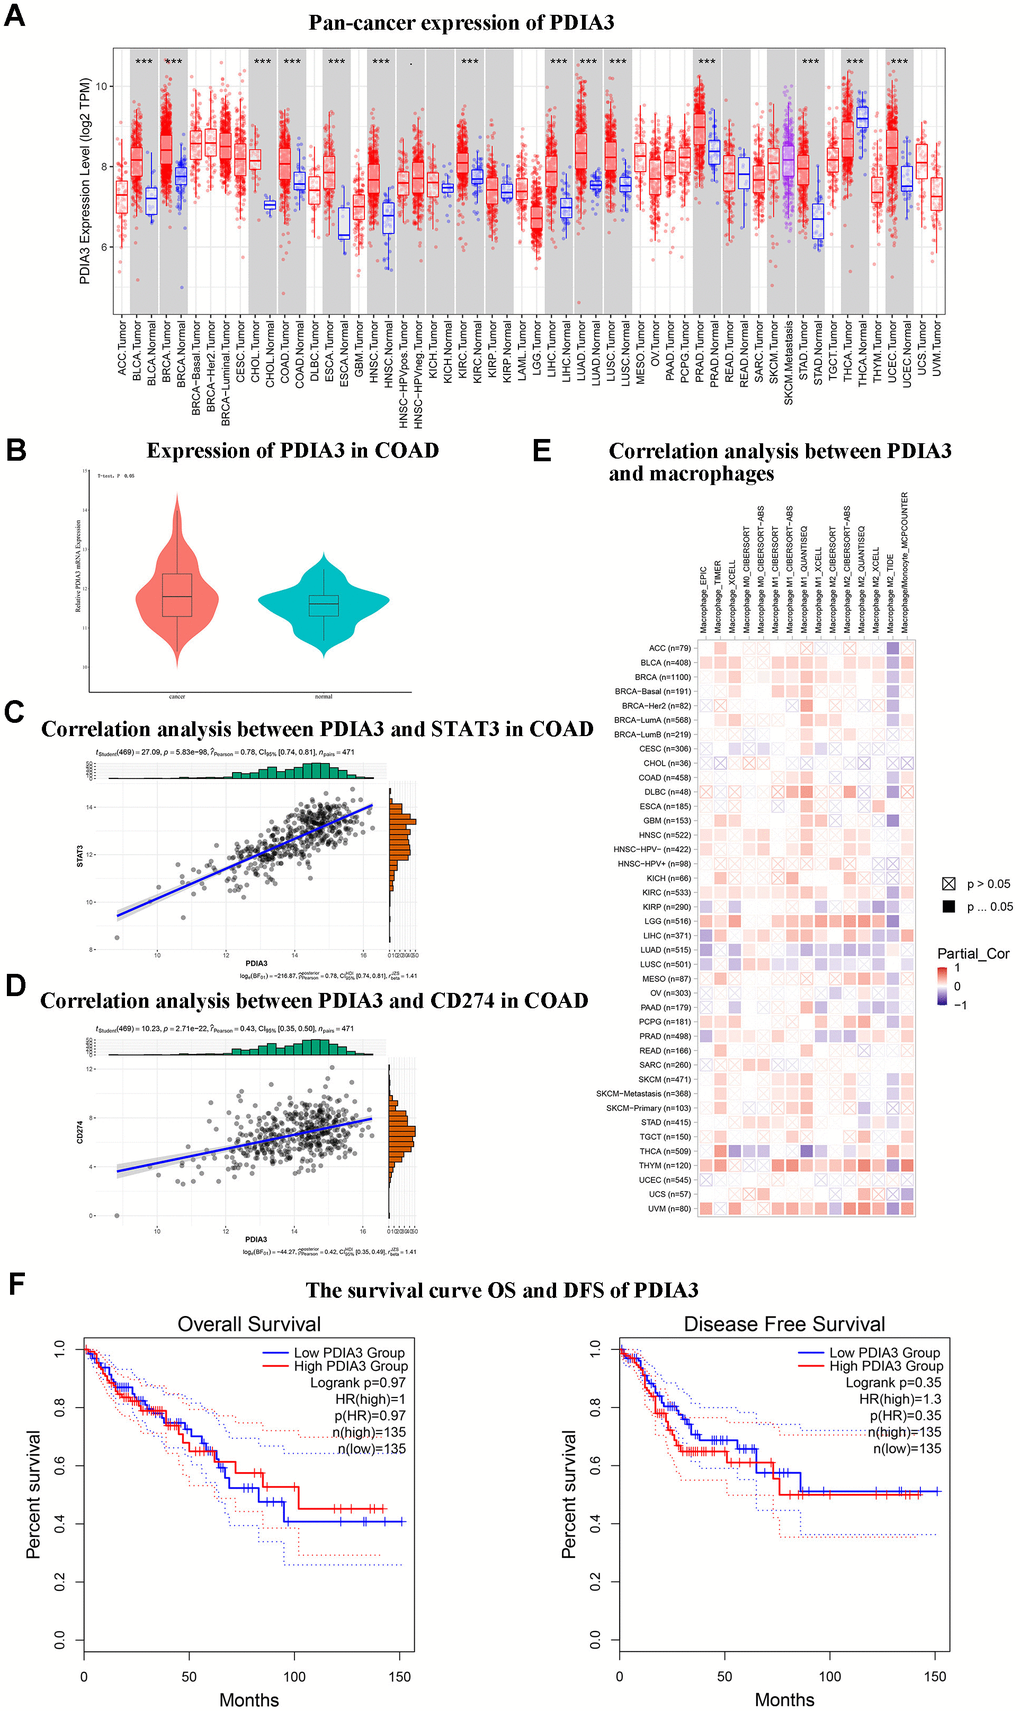 Bioinformatic analyses suggest that PDIA3 exhibits notably elevated expression in colorectal cancer (CRC) and demonstrates significant associative upregulation with STAT3, CD274, and monocyte/macrophage levels. (A) Widespread expression of PDIA3 across multiple cancer types. Statistical comparison via T-test, PB) Differential expression of PDIA3 within colorectal adenocarcinoma (COAD). Statistical comparison via T-test, PC) Evaluative correlation between PDIA3 and STAT3 expressions in COAD. Correlation coefficient (R) = 0.78, P=0.85E-98. (D) Evaluative correlation between PDIA3 and CD274 expressions in COAD. Correlation coefficient (R) = 0.43, P=2.71E-22. (E) Analysis of the correlation between PDIA3 and macrophages in pan cancer. Statistical comparison via T-test, PF) Survival analysis depicting Overall Survival (OS) (Log-rank P=0.97) and Disease-Free Survival (DFS) (Log-rank P=0.35) as influenced by PDIA3 expression in COAD.